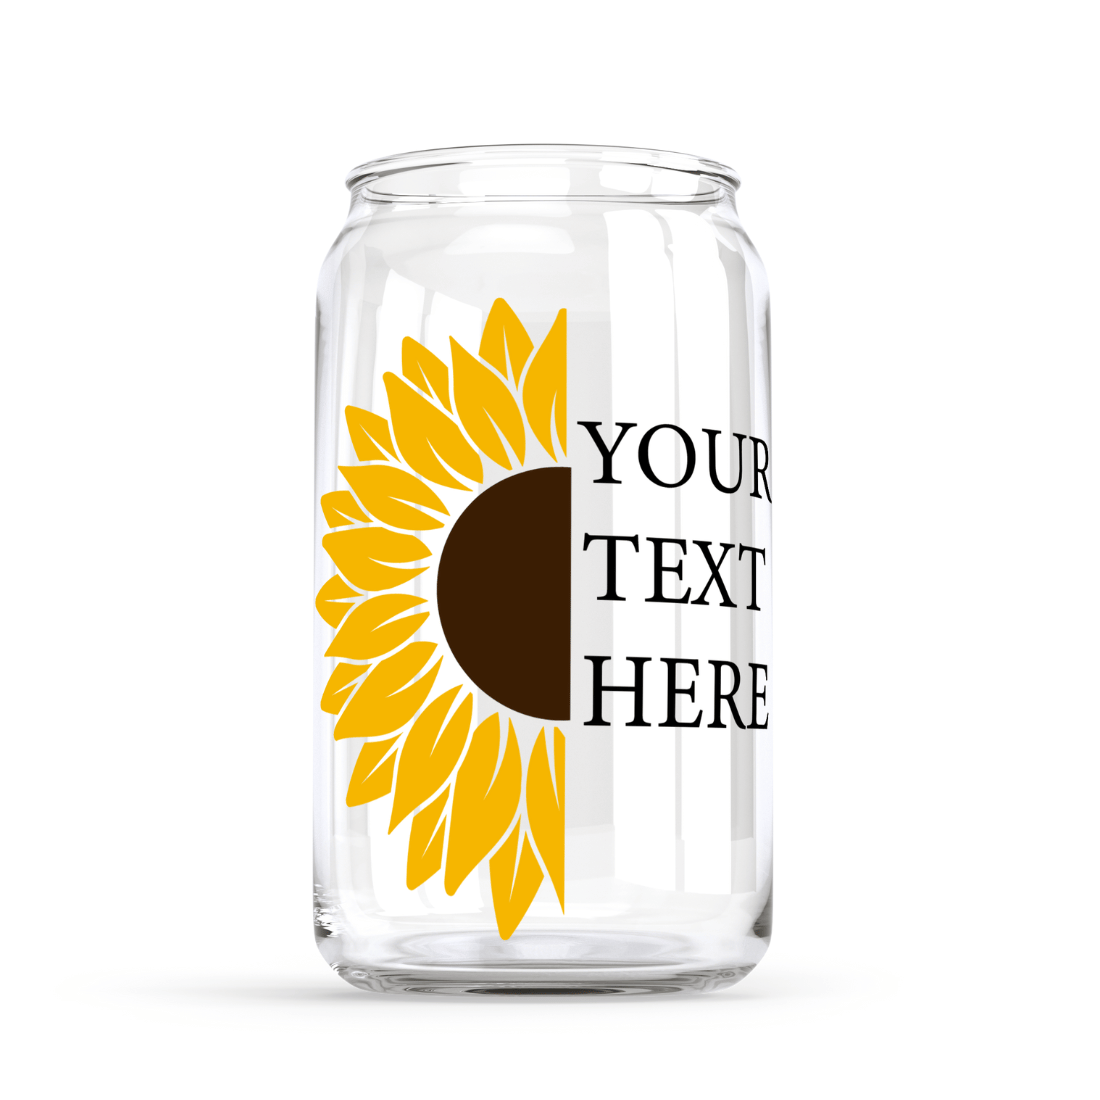 Glass jar with a sunflower on it.